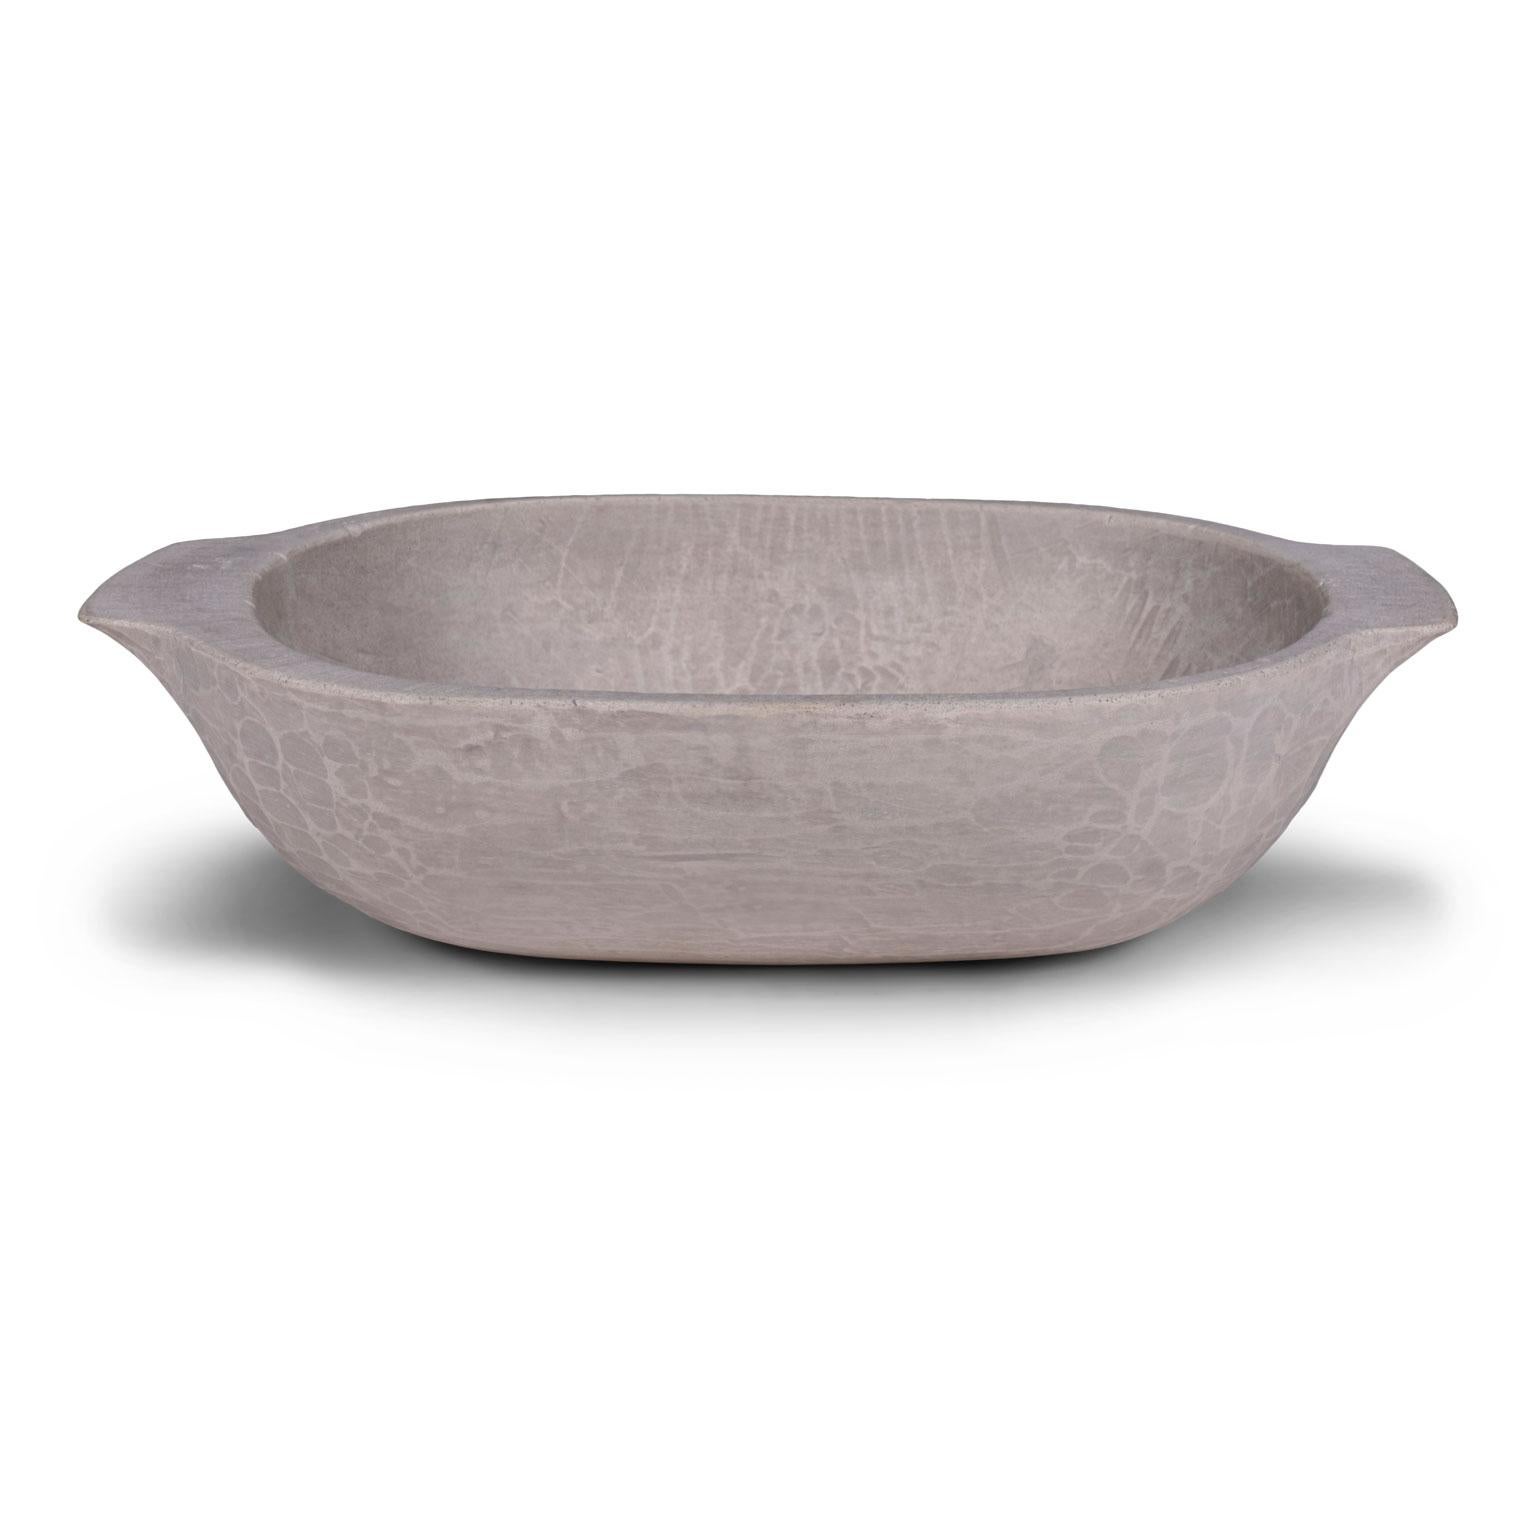 Contemporary artisan oolitic limestone bowl or basin from England.